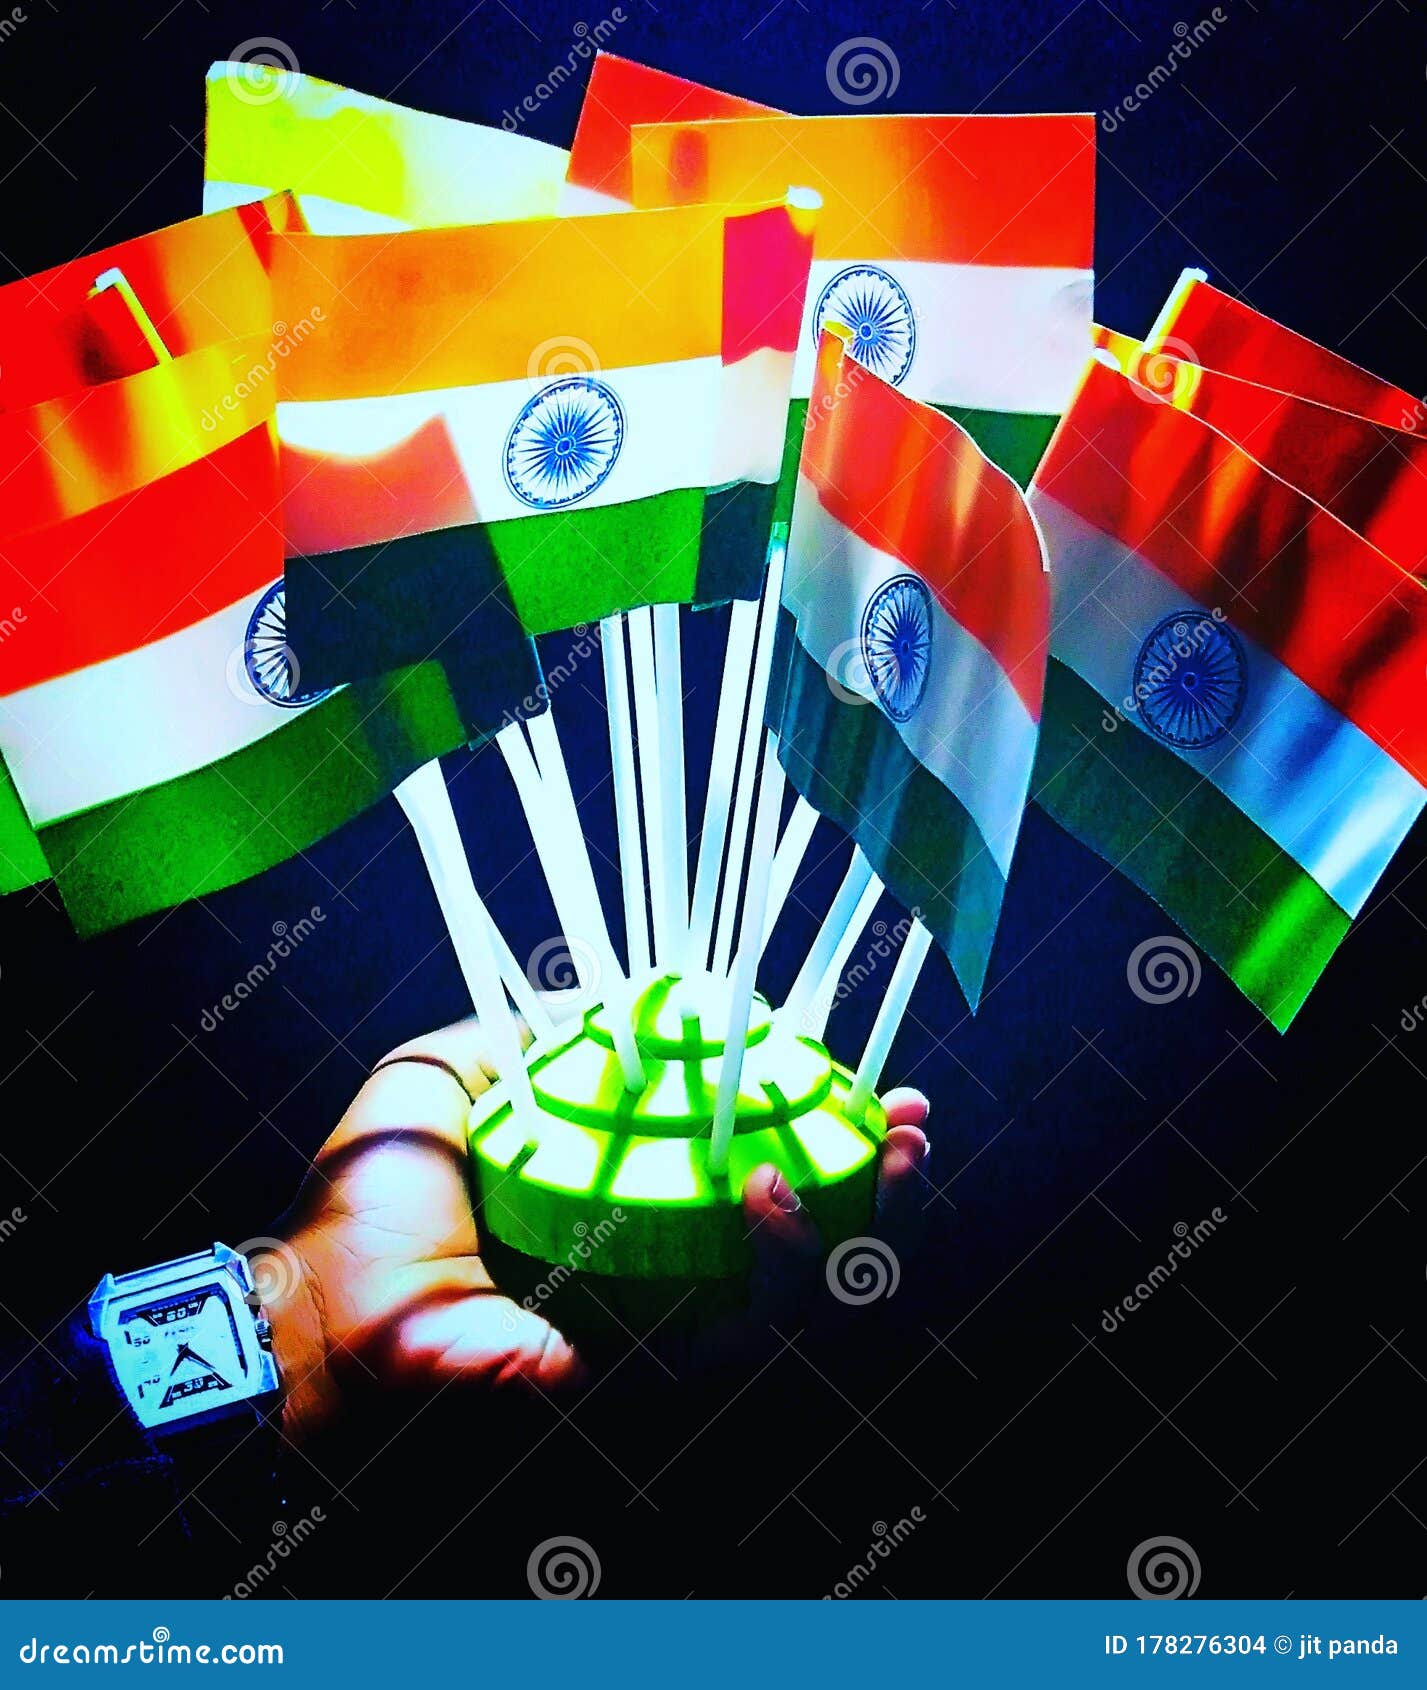 Indian Flag Jay Hind Hd Photo Stock Photo - Image of hind, indian: 178276304